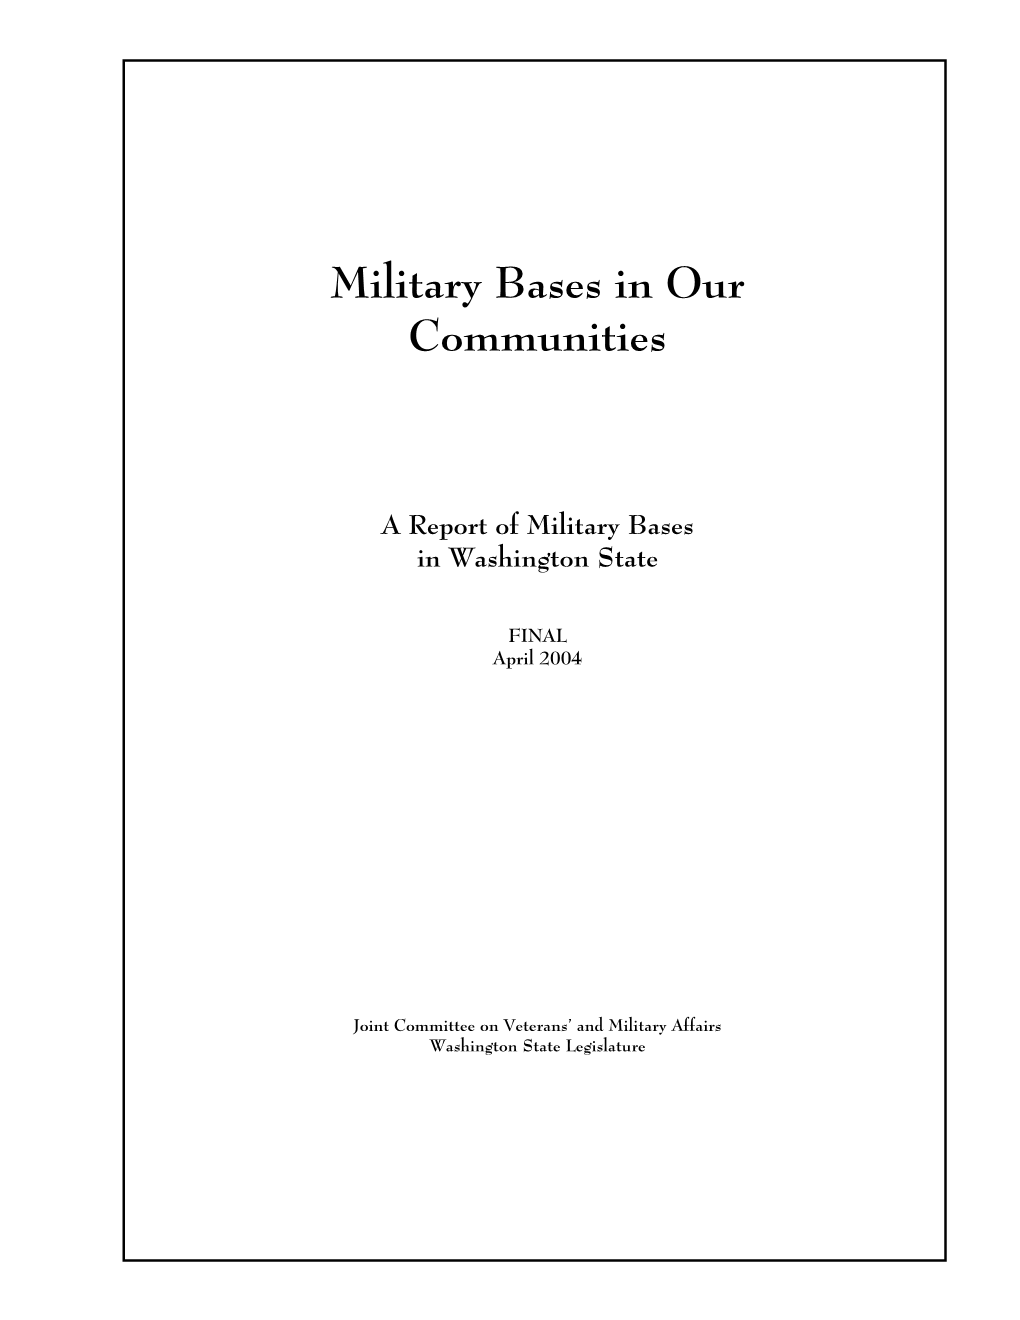 Base Realignment and Closure Report